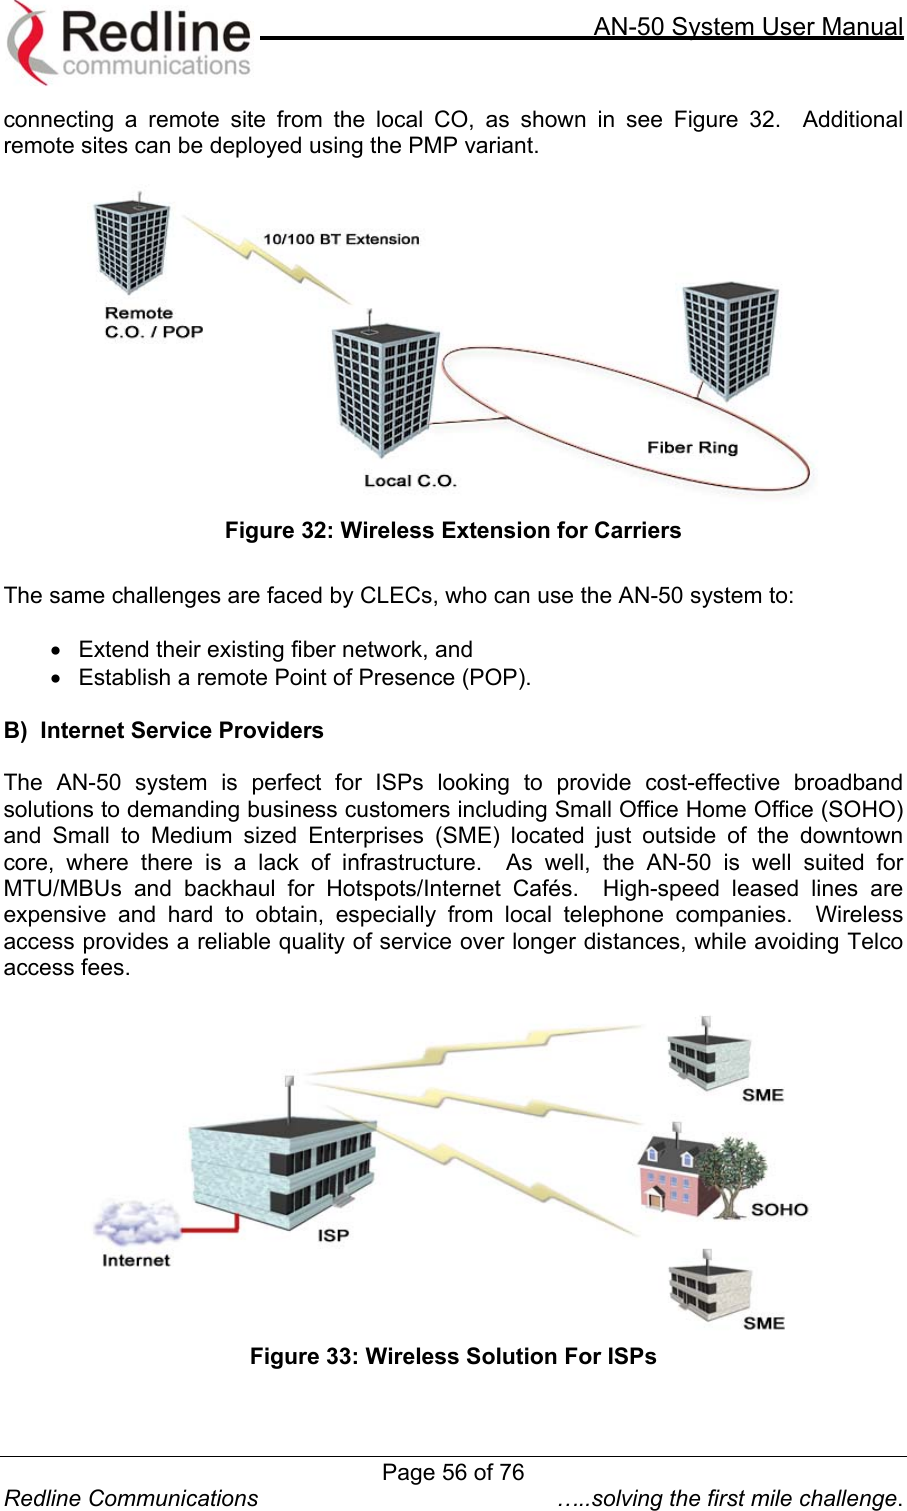     AN-50 System User Manual  Redline Communications  …..solving the first mile challenge. connecting a remote site from the local CO, as shown in see Figure 32.  Additional remote sites can be deployed using the PMP variant.     Figure 32: Wireless Extension for Carriers  The same challenges are faced by CLECs, who can use the AN-50 system to:   •  Extend their existing fiber network, and  •  Establish a remote Point of Presence (POP).     B)  Internet Service Providers  The AN-50 system is perfect for ISPs looking to provide cost-effective broadband solutions to demanding business customers including Small Office Home Office (SOHO) and Small to Medium sized Enterprises (SME) located just outside of the downtown core, where there is a lack of infrastructure.  As well, the AN-50 is well suited for MTU/MBUs and backhaul for Hotspots/Internet Cafés.  High-speed leased lines are expensive and hard to obtain, especially from local telephone companies.  Wireless access provides a reliable quality of service over longer distances, while avoiding Telco access fees.     Figure 33: Wireless Solution For ISPs   Page 56 of 76